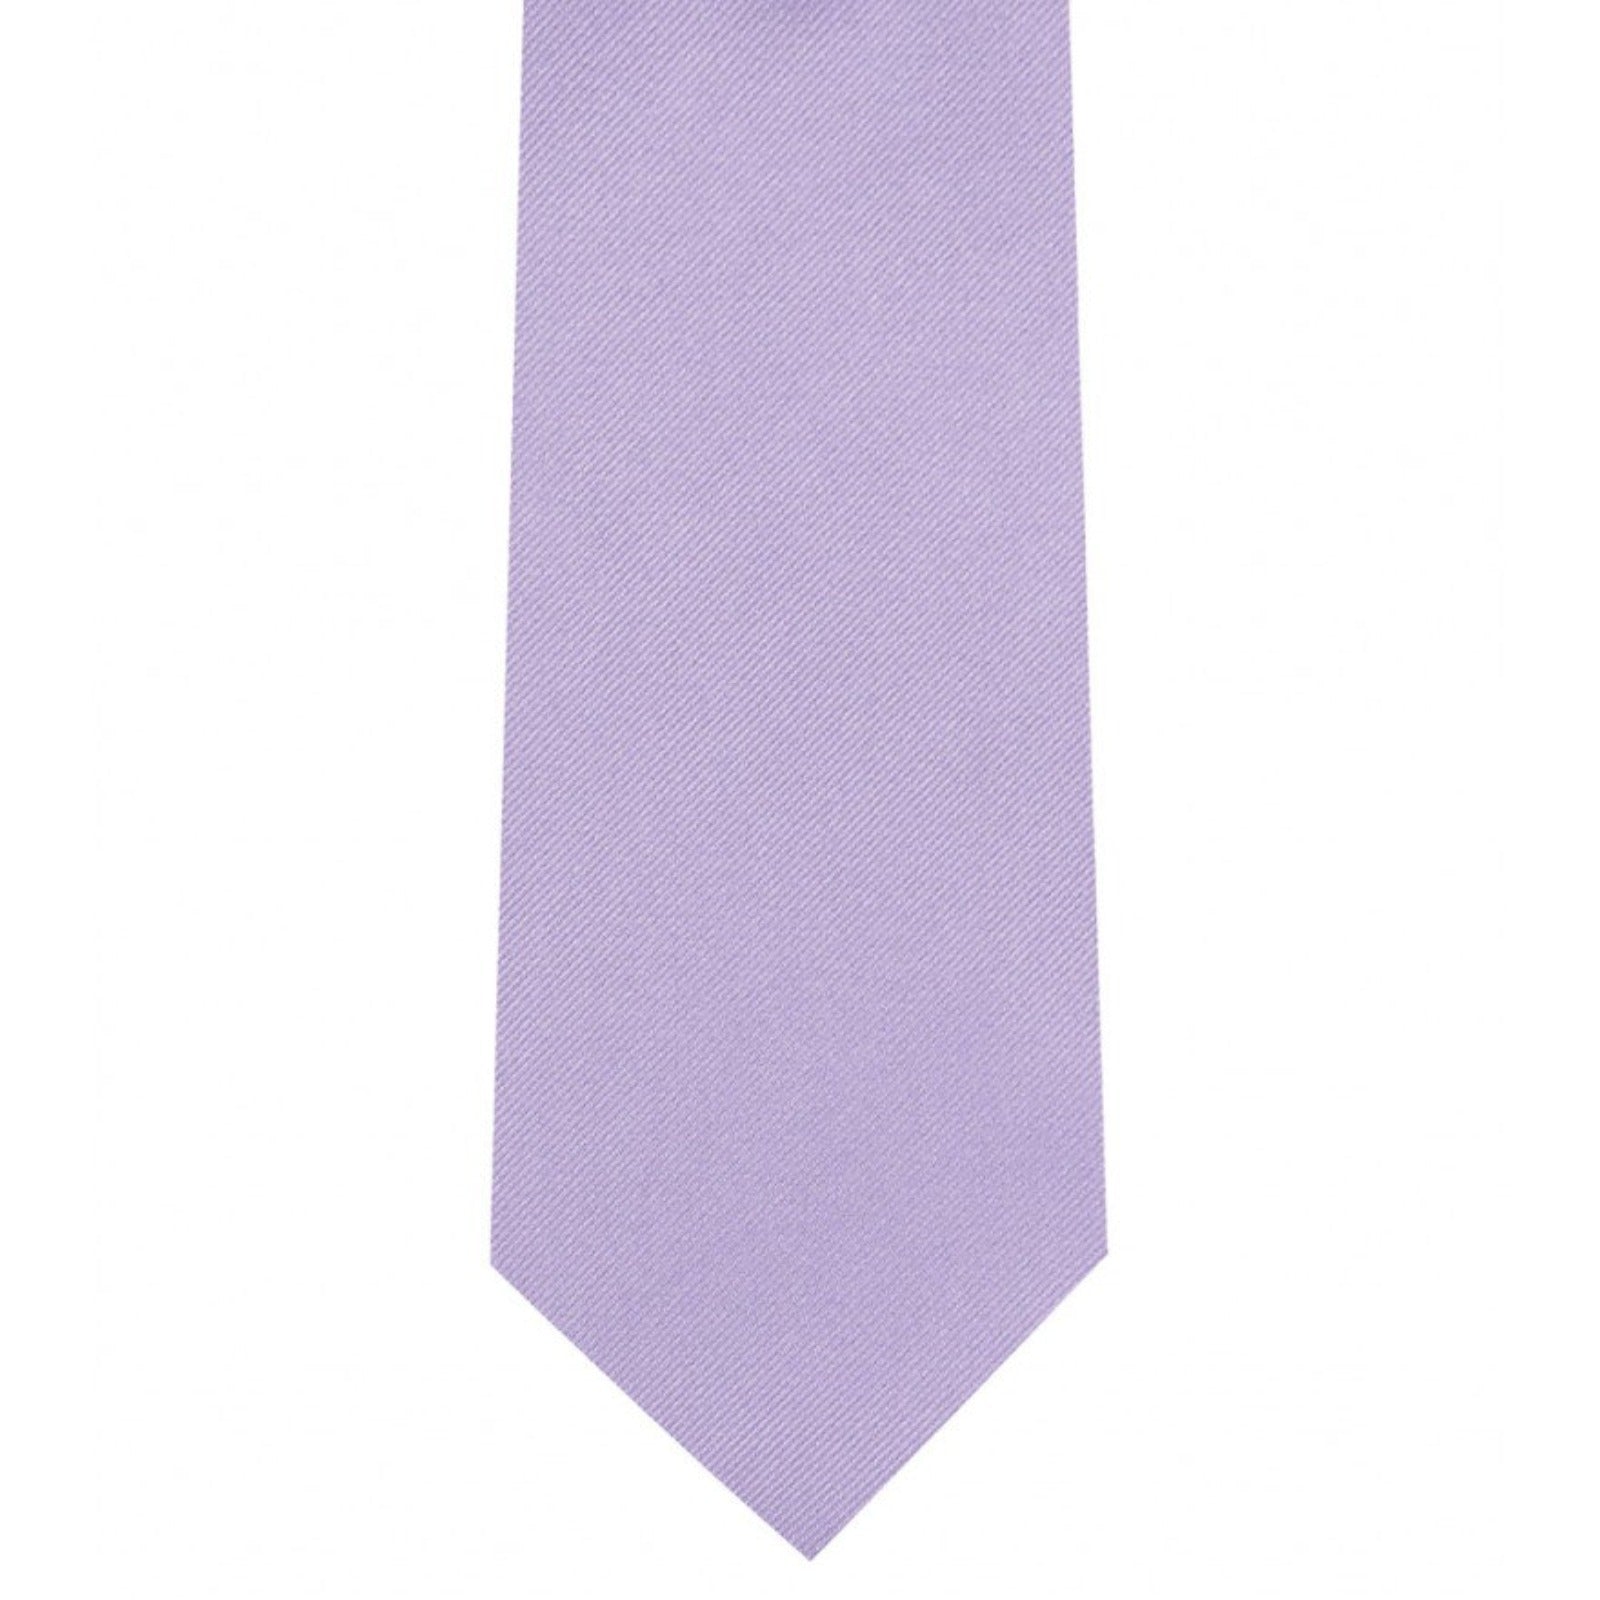 Classic Lilac Skinny, Ultra Skinny and Standard Width Ties for Weddings ...